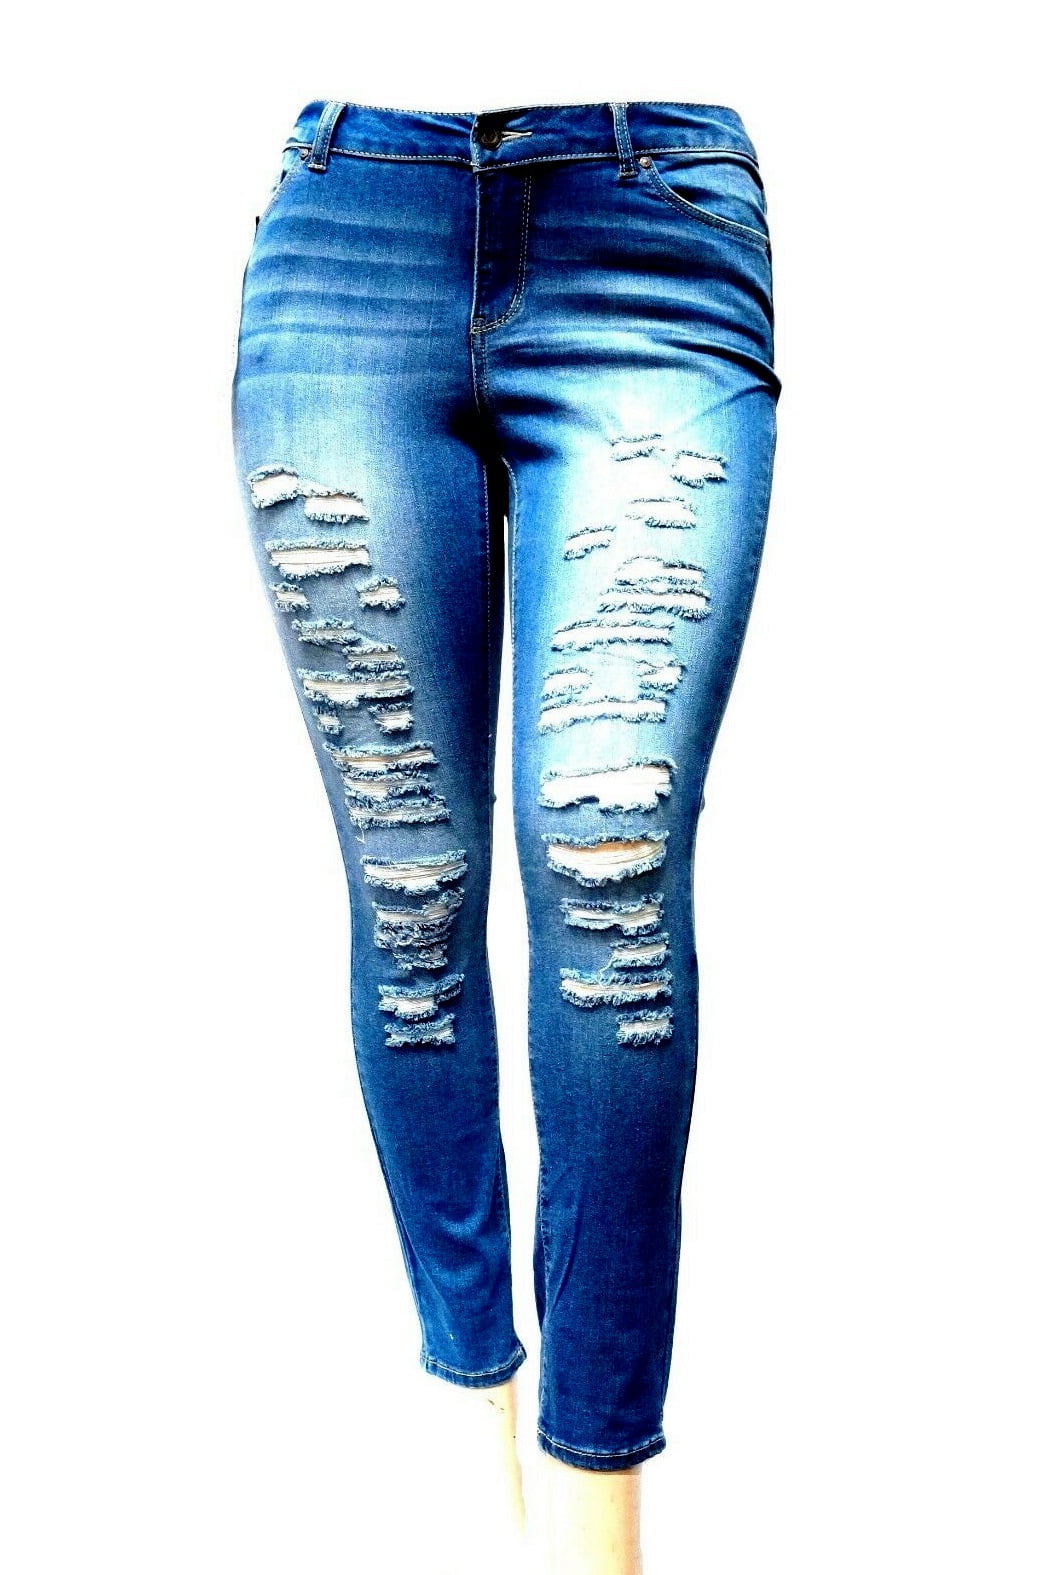 WOMENS PLUS SIZE Stretch Distressed Ripped SKINNY DENIM JEANS PANTS 14 to 34 